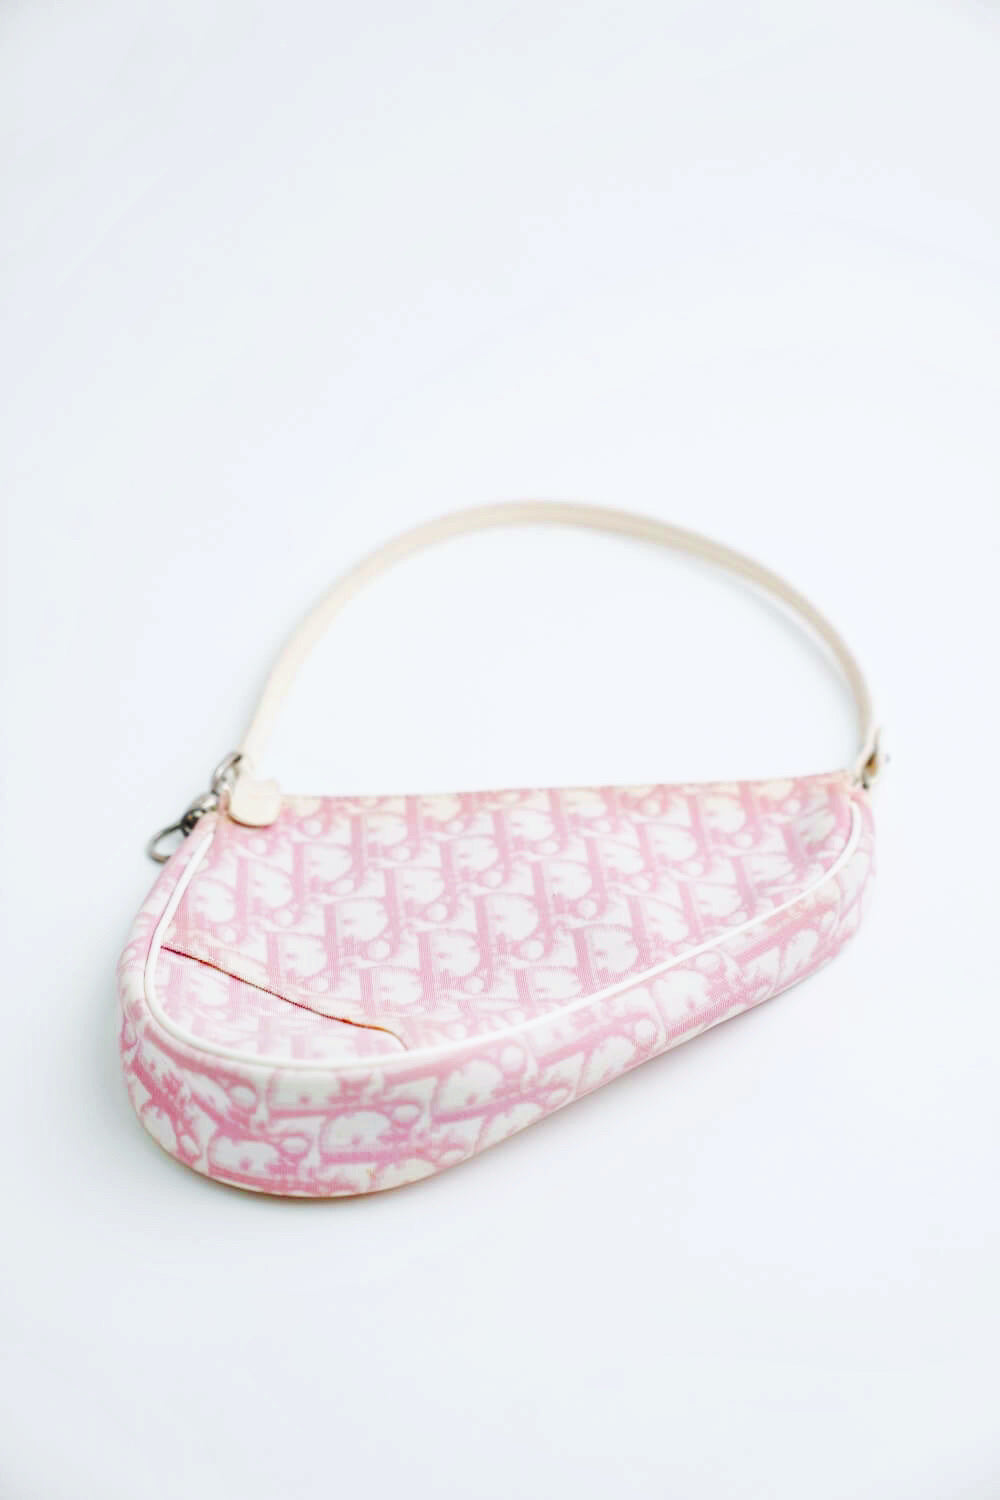 Dior - Authenticated Saddle Vintage Classic Handbag - Cloth Pink for Women, Very Good Condition